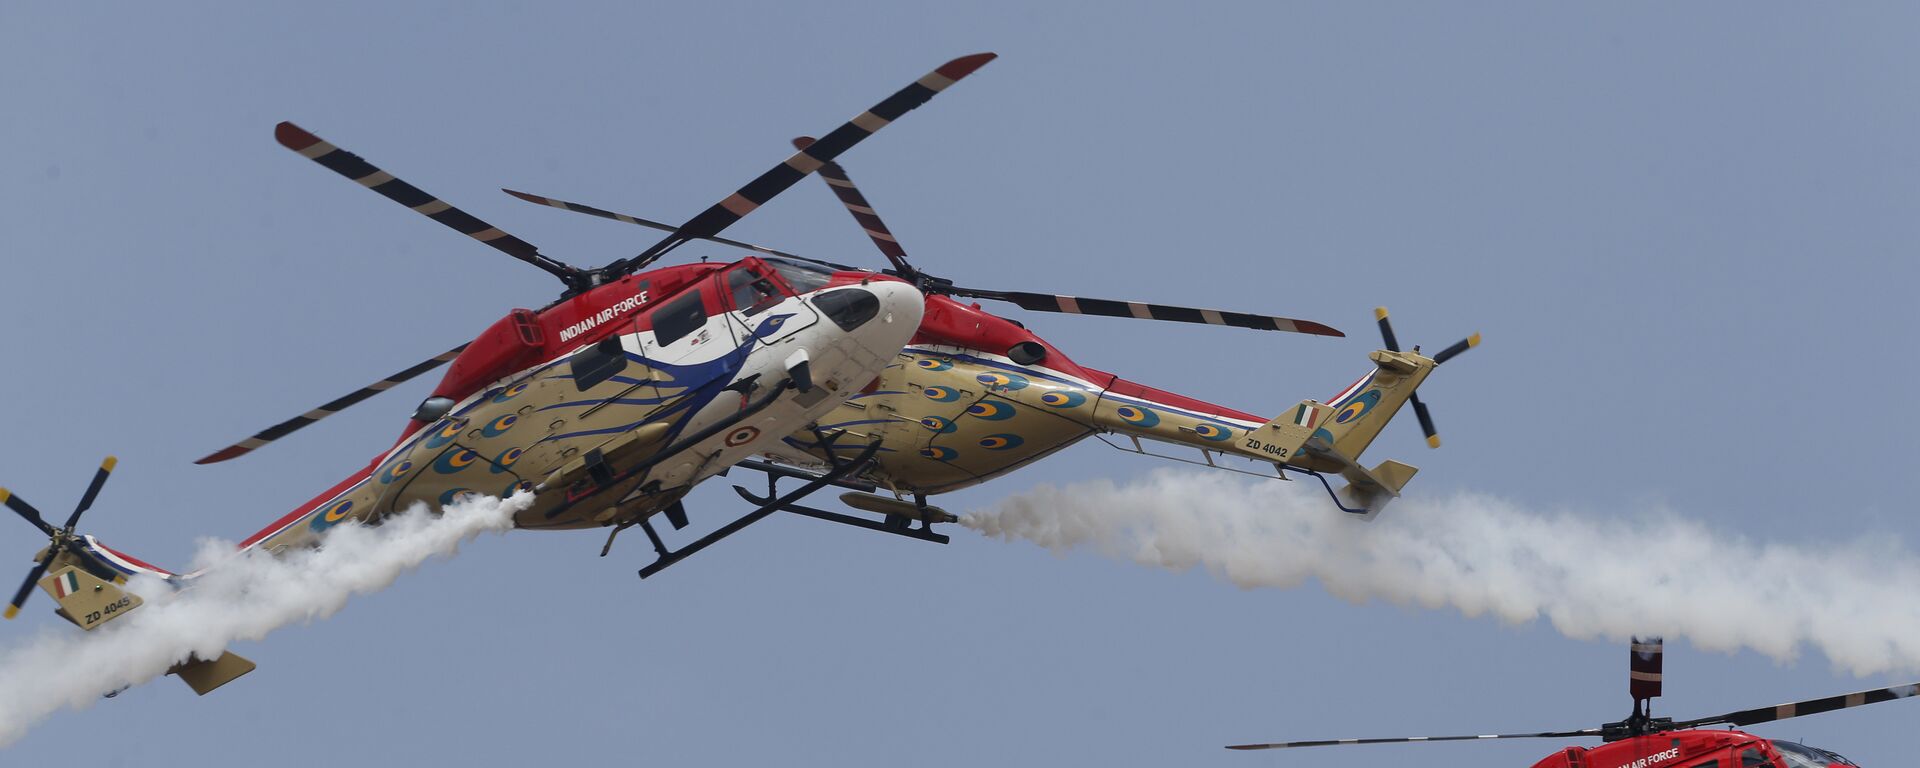 Indigenously manufactured Indian Air Force Dhruv helicopters perform at the opening ceremony of Aero India 2017 at Yelahanka air base in Bangalore, India, Tuesday, Feb. 14, 2017 - Sputnik Mundo, 1920, 06.10.2021